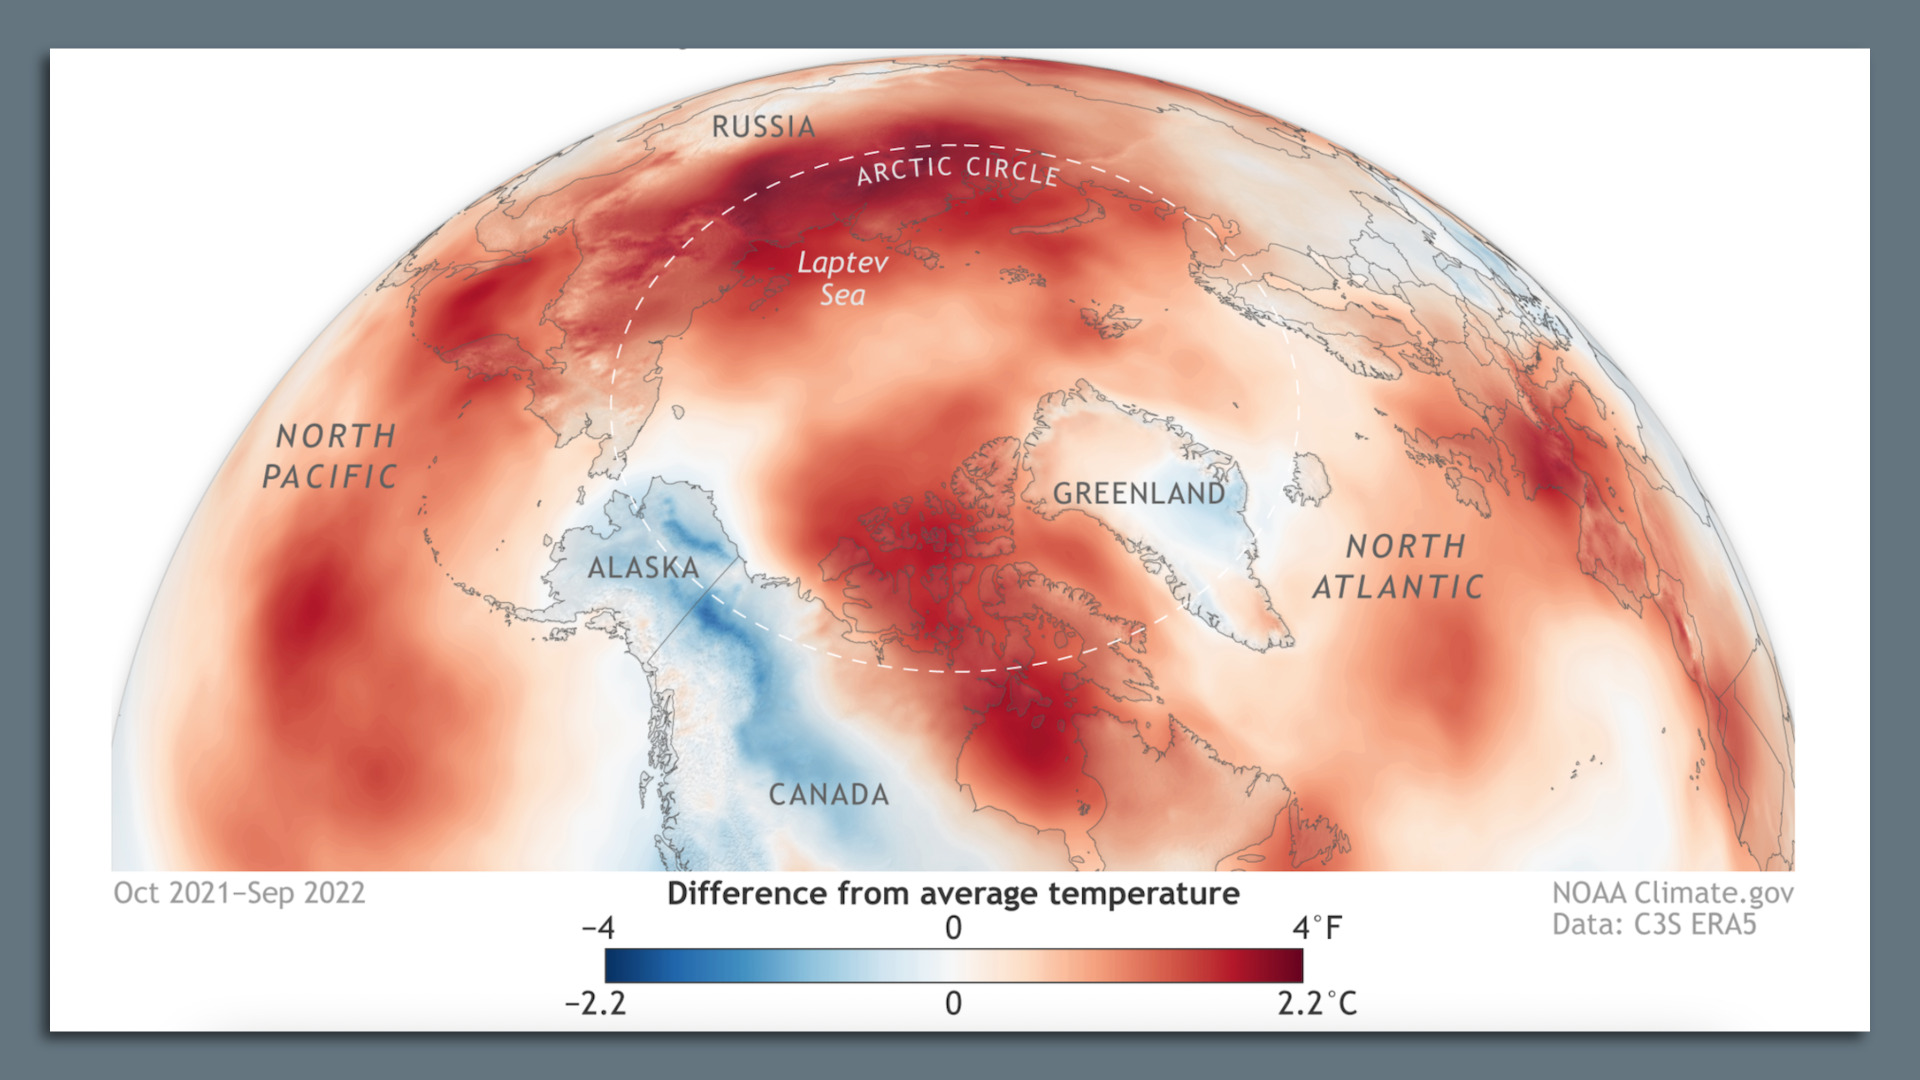 Temperature departures from average between Sept. 2021 and Oct. 2022 for the Arctic. Image: NOAA